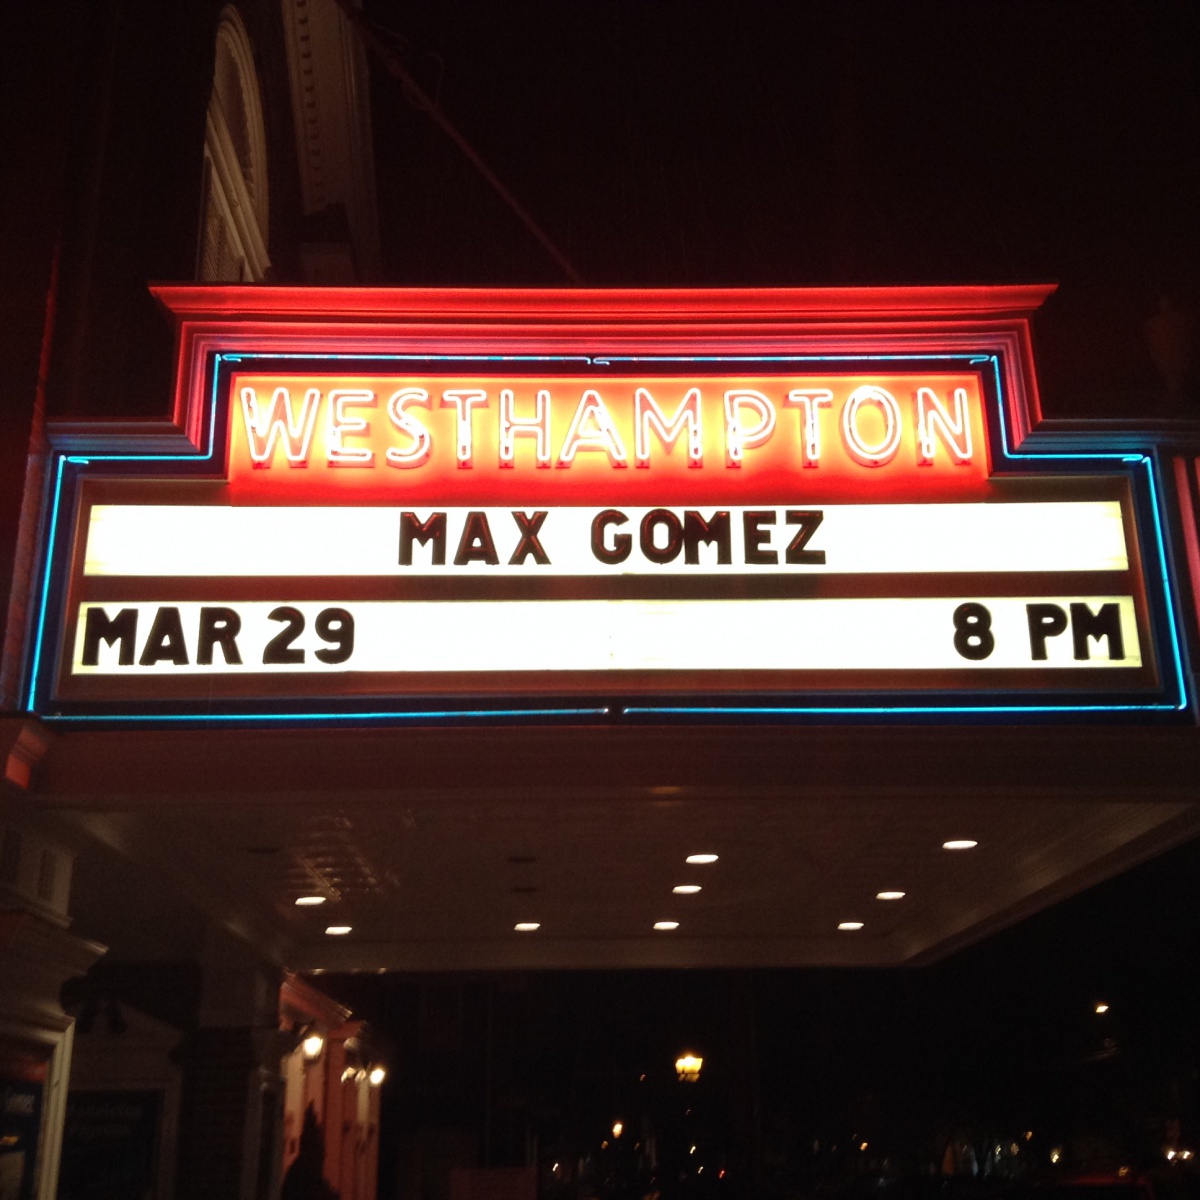 Max Gomez performed at Westhampton Beach Performing Arts Center on March 29.